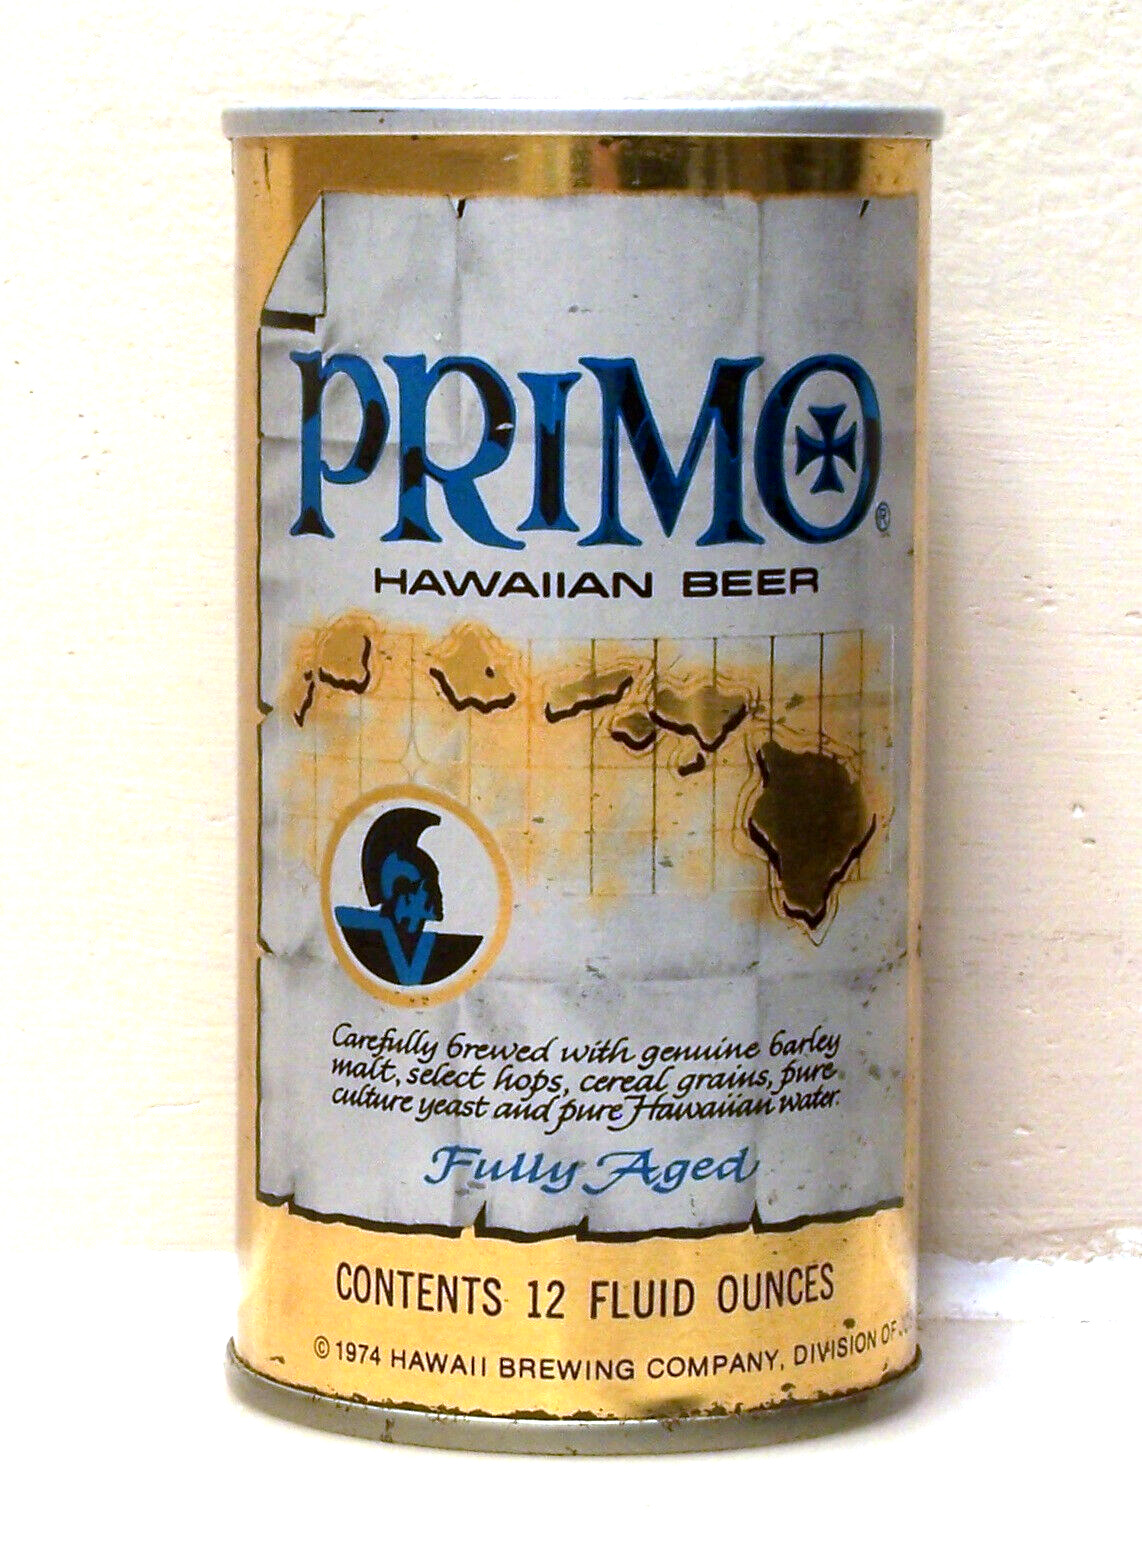 PRIMO gold/blue/white Hawaiian S/S beer can